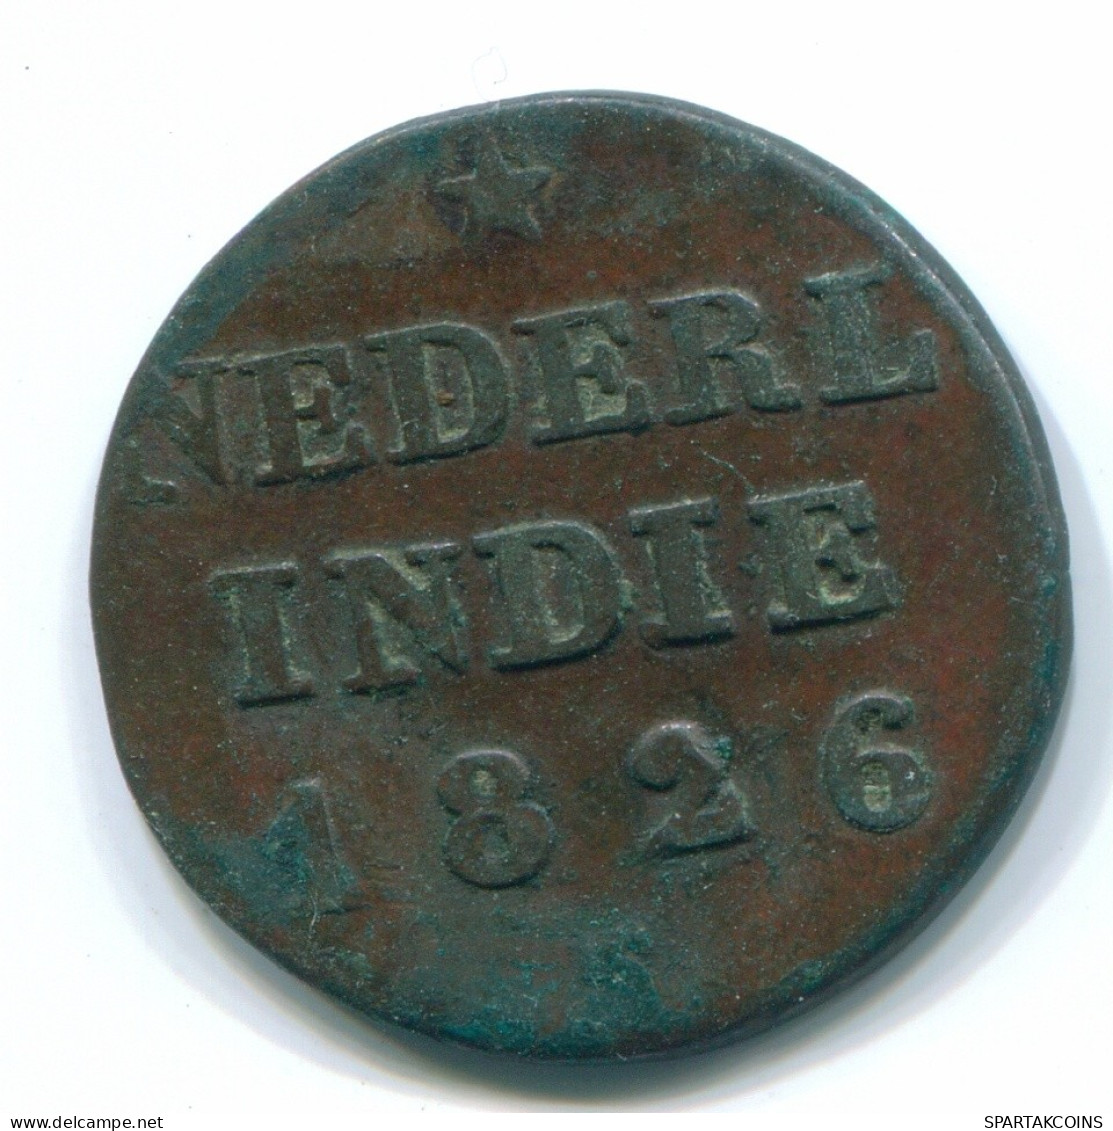 1/4 STUIVER 1826 SUMATRA NETHERLANDS EAST INDIES Copper Colonial Coin #S11668.U.A - Dutch East Indies